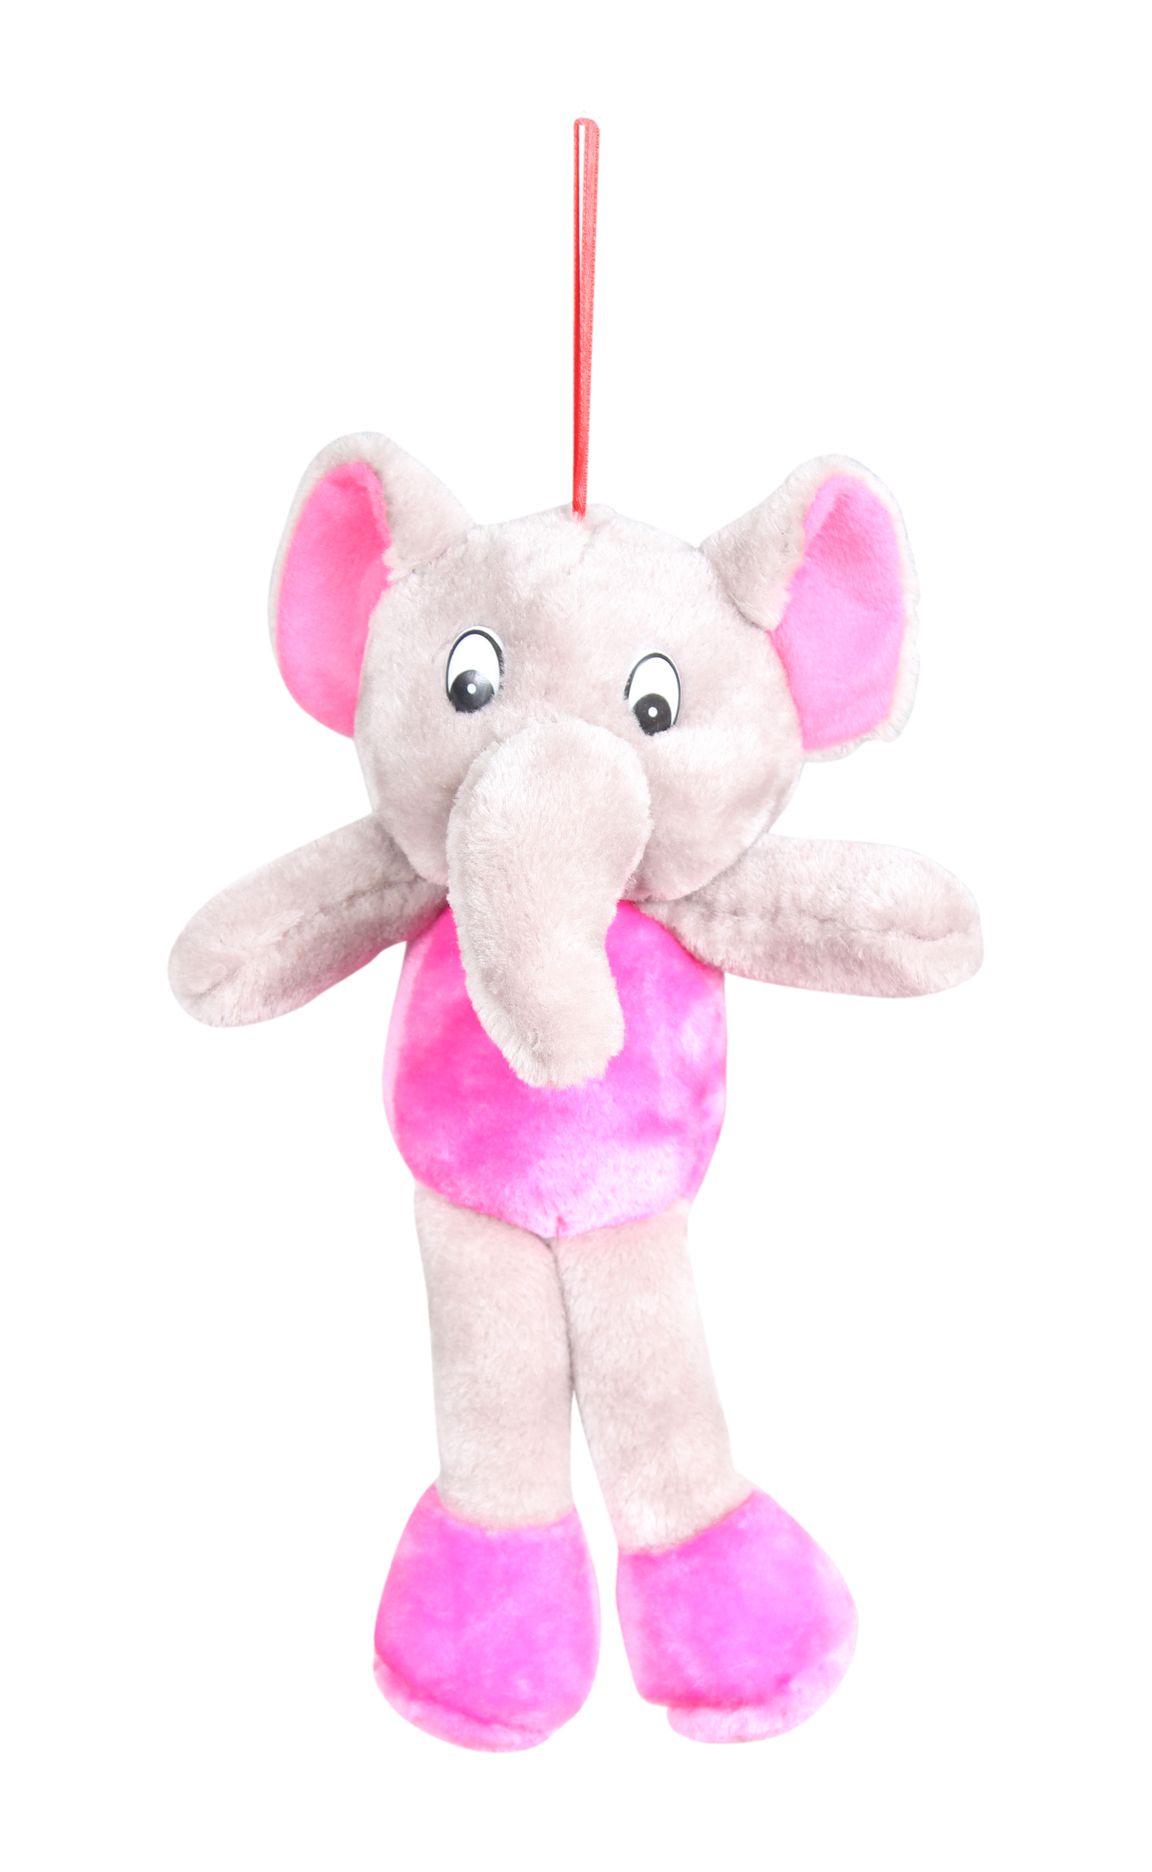     			Tickles Baby Car Hanging Elephant Soft Stuffed Plush Animal Toy for Kids(Color:Pink & Grey Size: 25 cm)